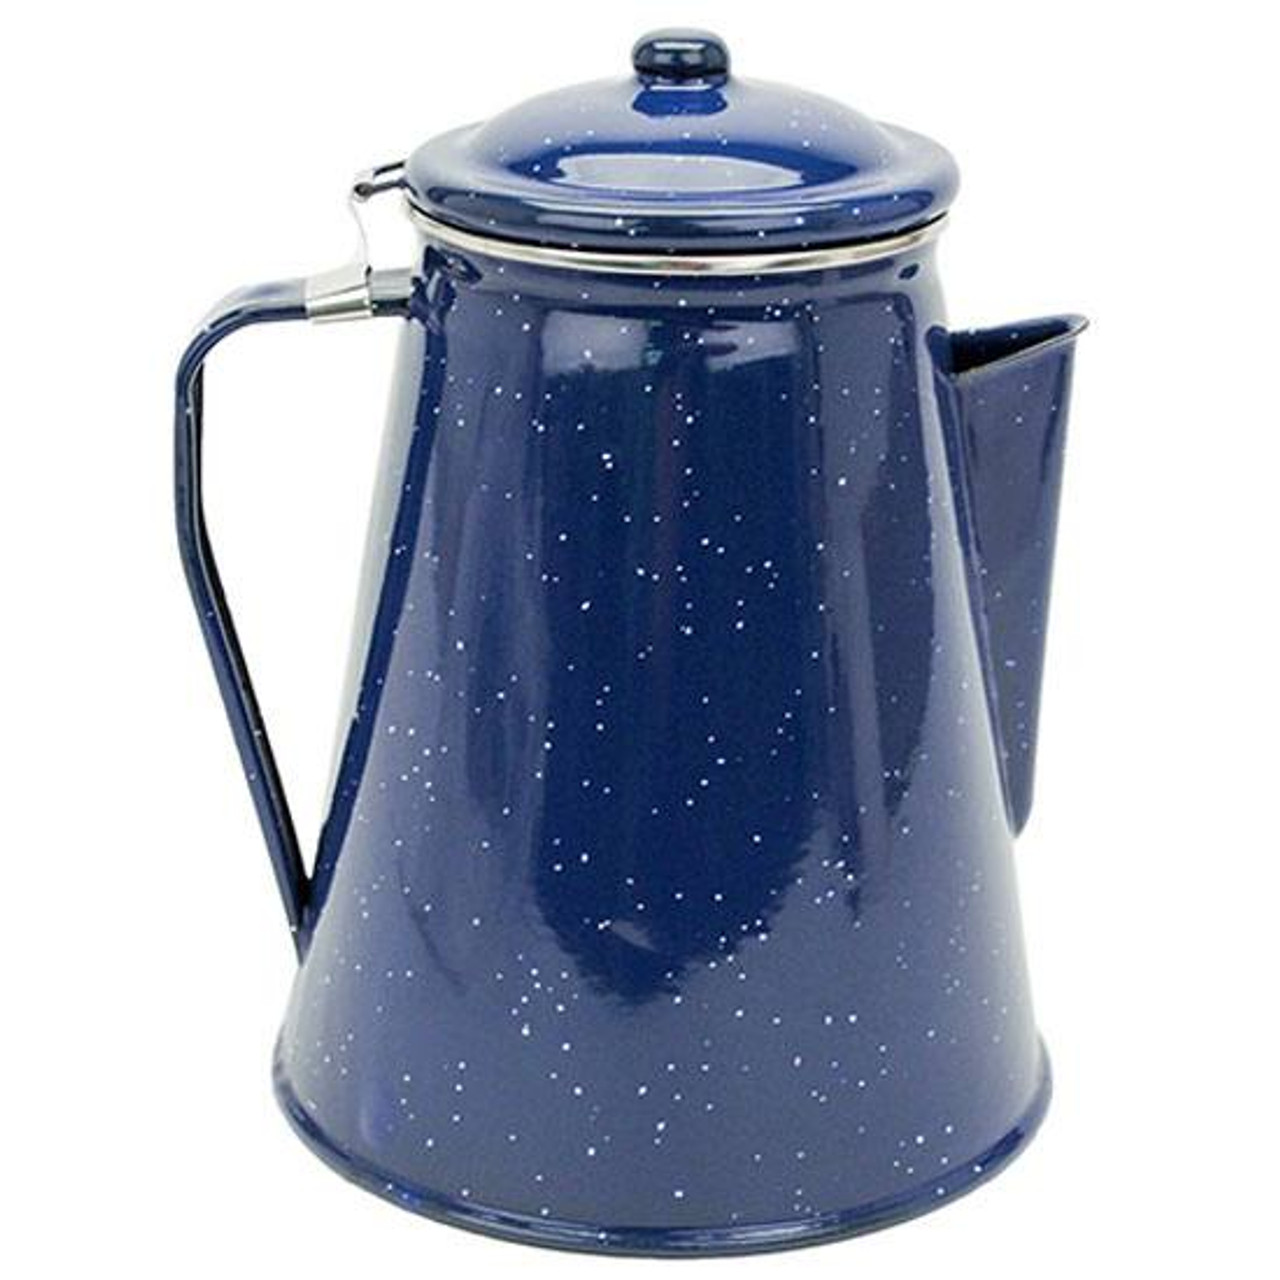 Stainless Steel Percolator Coffee Pot 9 Cups - Stansport